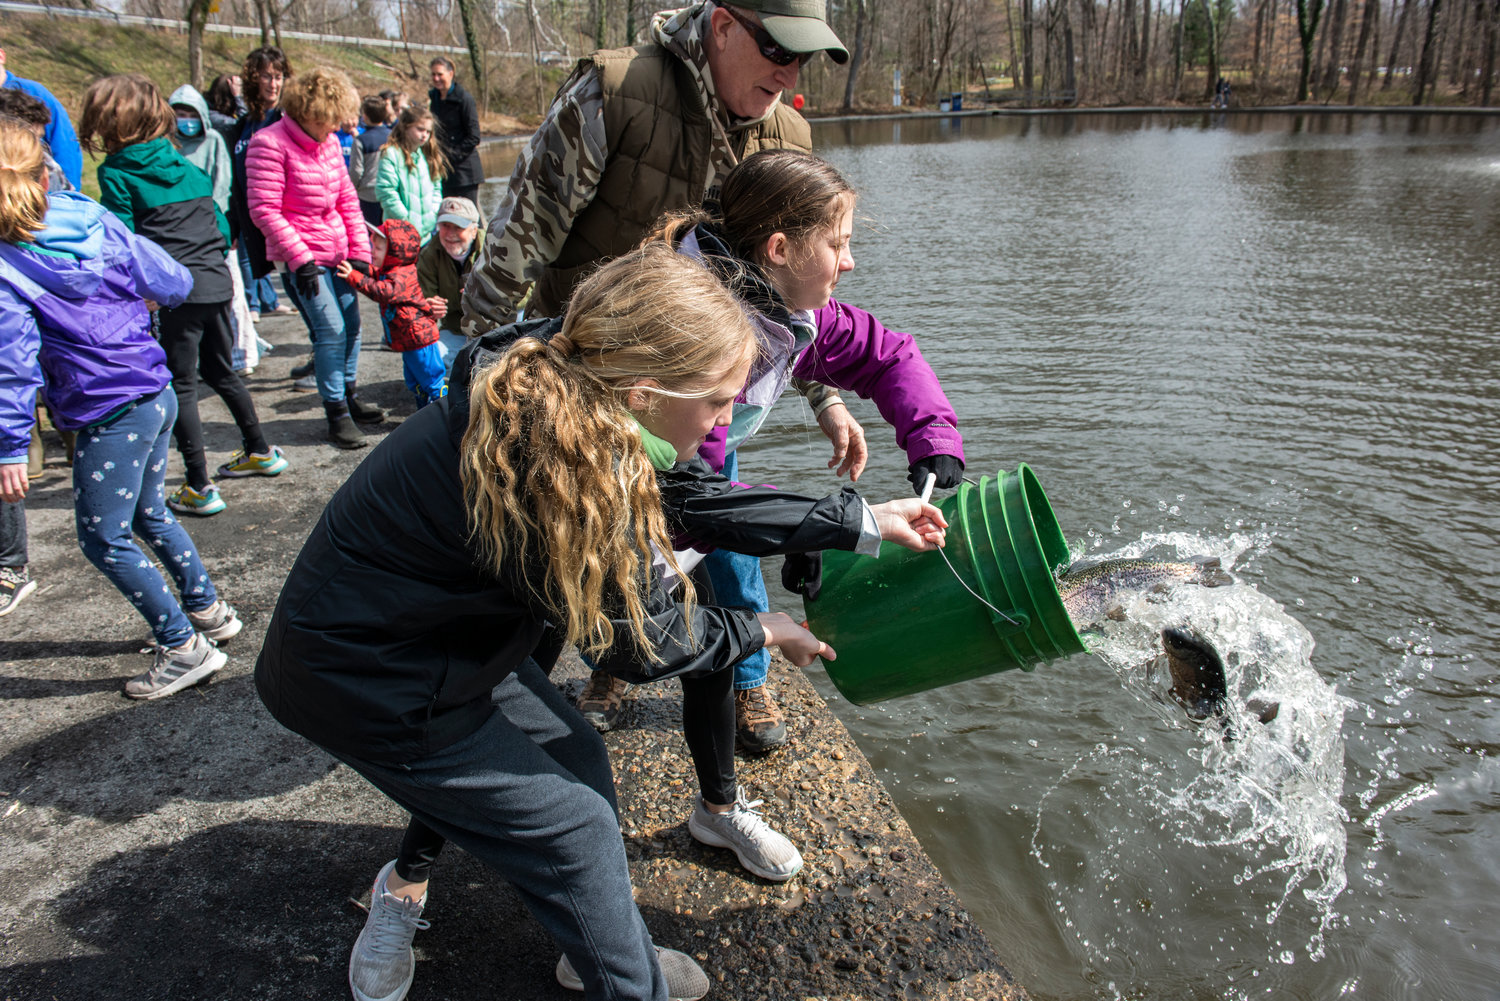 Students release fish into the pond.